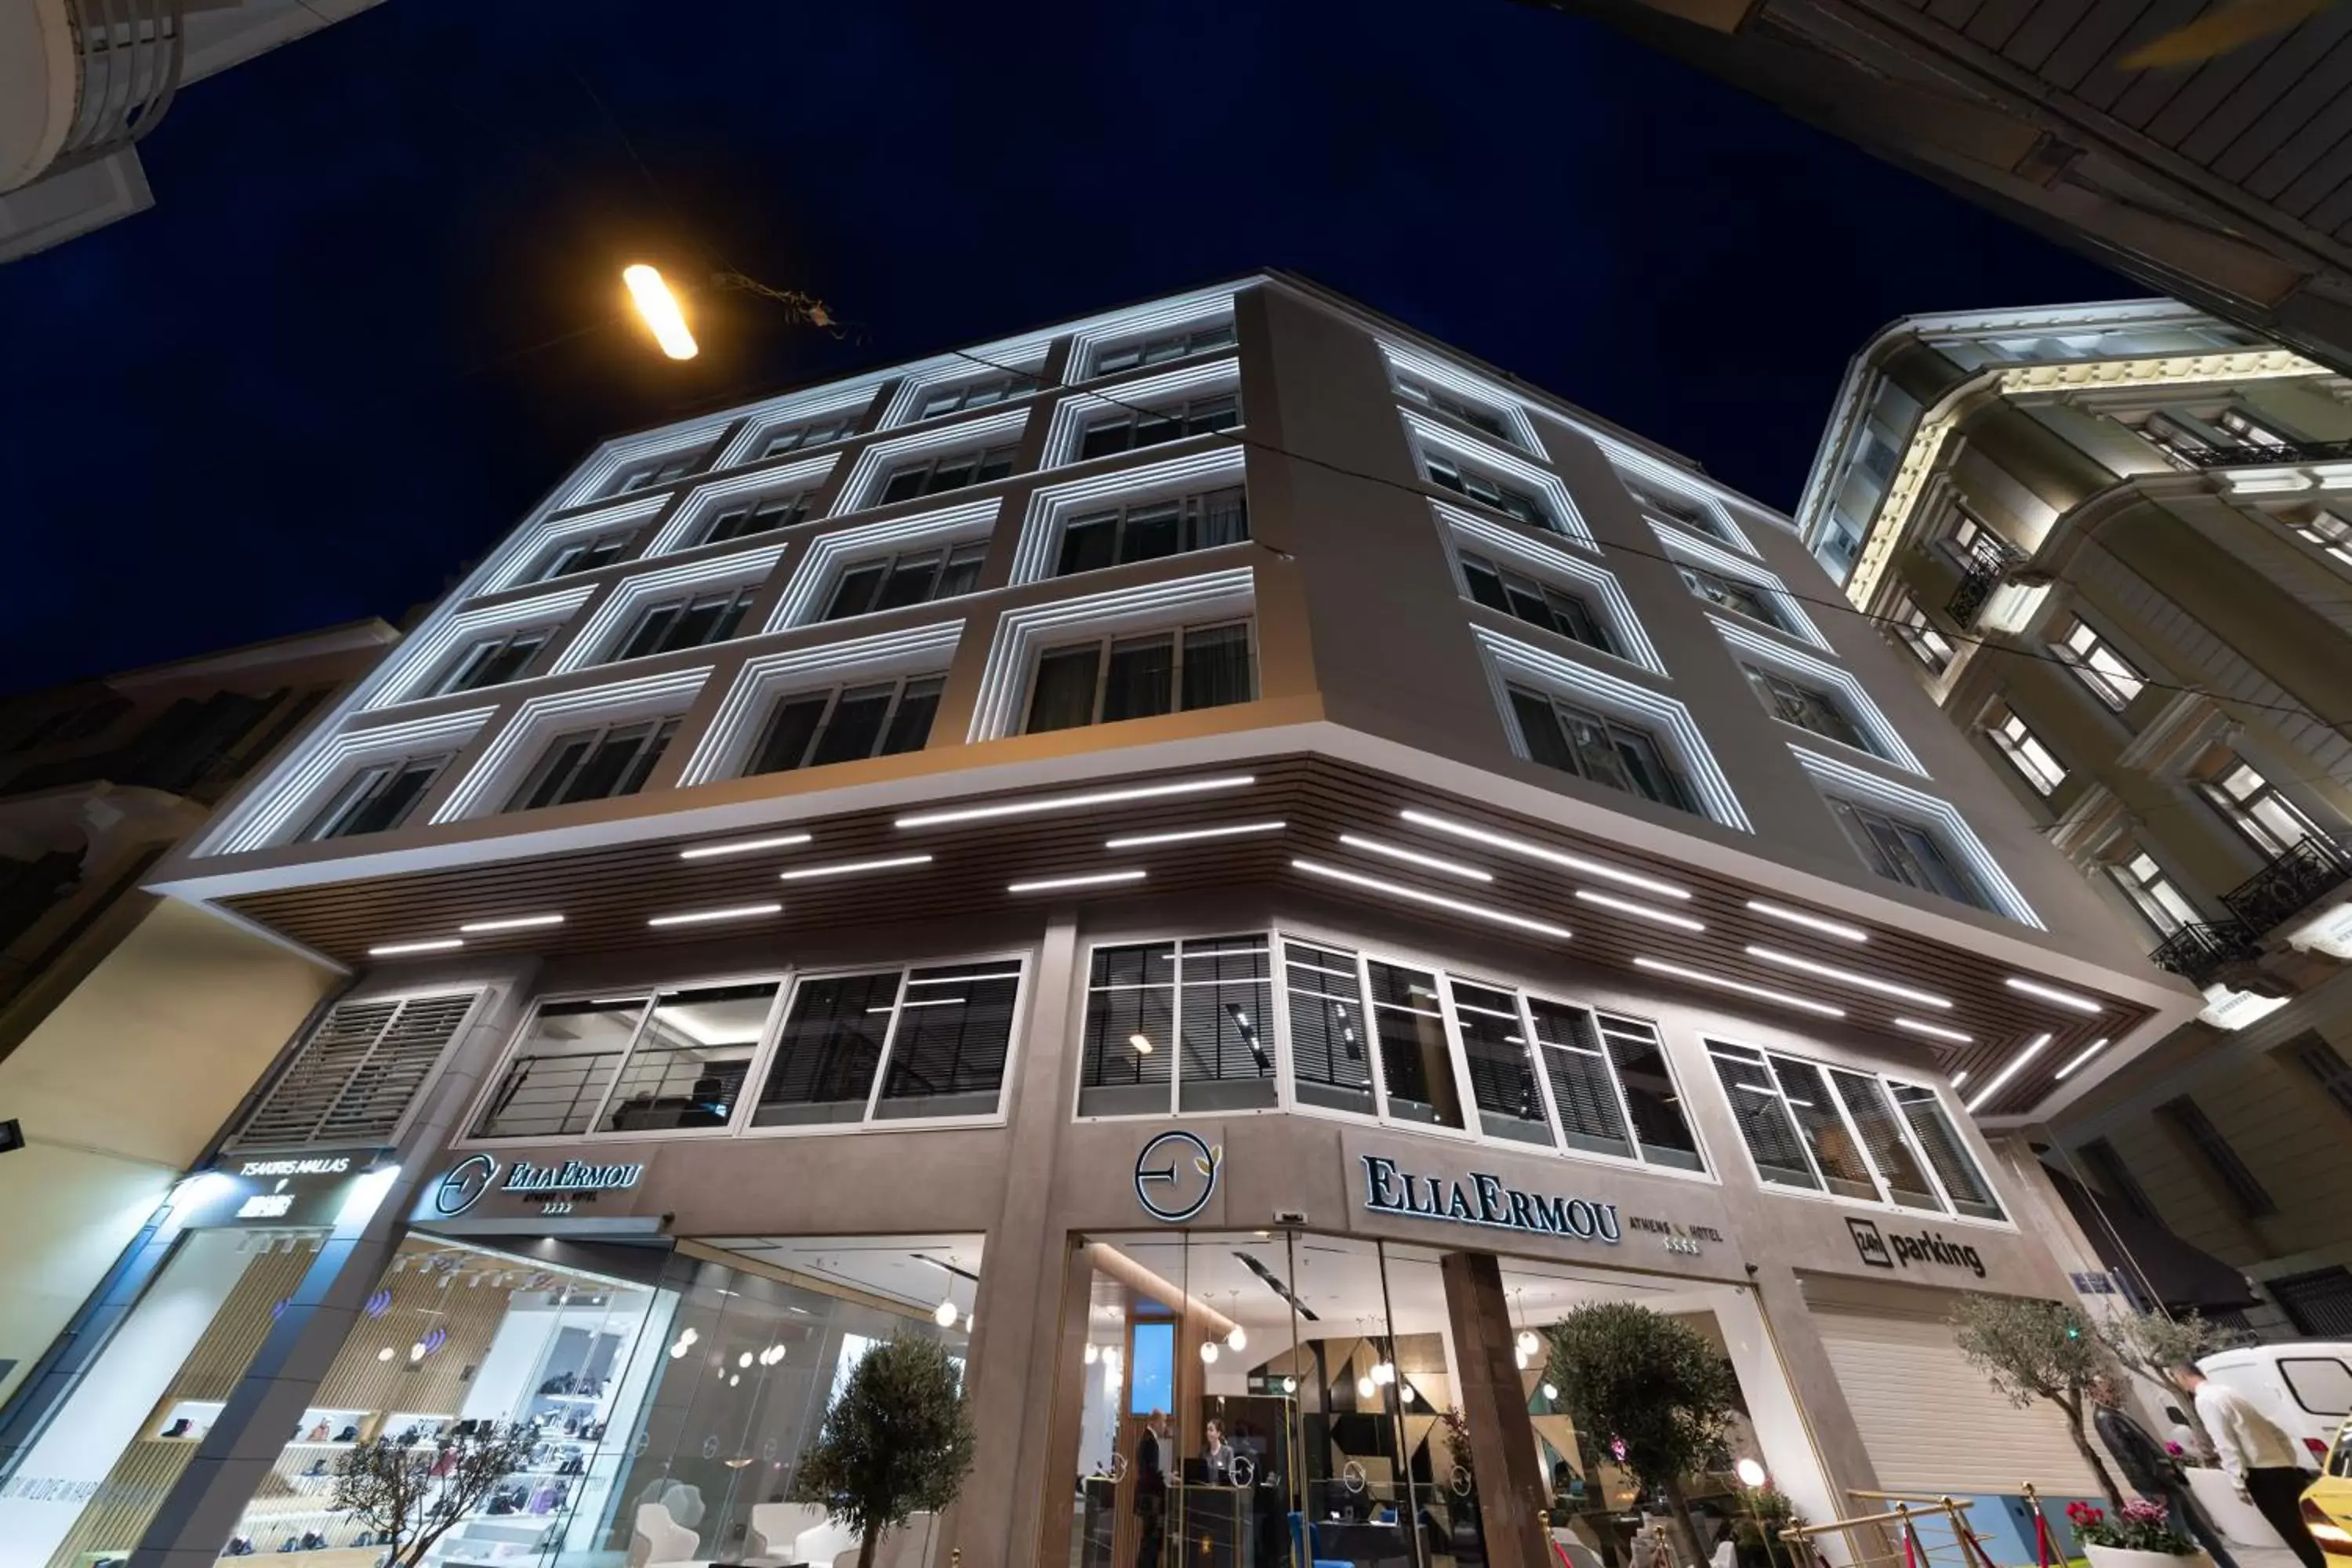 Property Building in Elia Ermou Athens Hotel